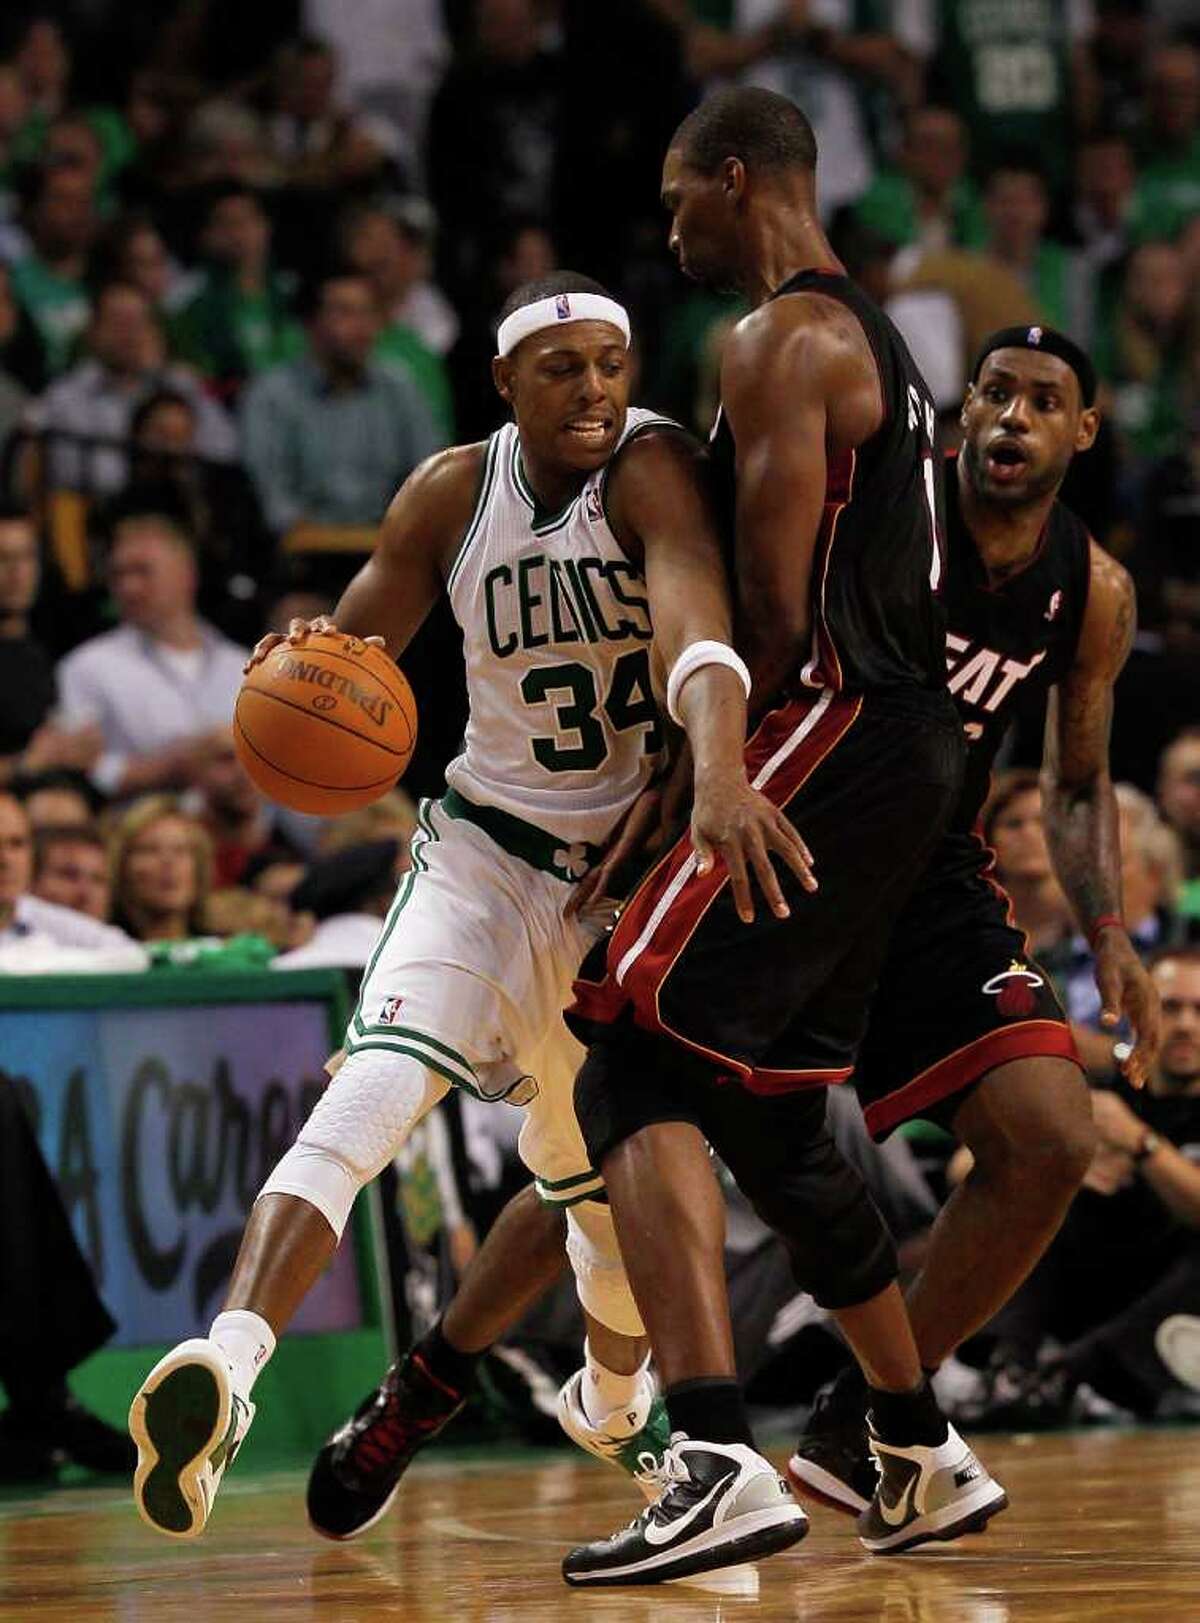 BOSTON, MA - OCTOBER 26: Paul Pierce #34 of the Boston Celtics drives around Chris Bosh #1 and LeBron James #6 of the Miami Heat during a game against the Miami Heat at the TD Banknorth Garden on October 26, 2010 in Boston, Massachusetts. NOTE TO USER: User expressly acknowledges and agrees that, by downloading and or using this photograph, User is consenting to the terms and conditions of the Getty Images License Agreement.(Photo by Jim Rogash/Getty Images) *** Local Caption *** Paul Pierce;Chris Bosh;LeBron James